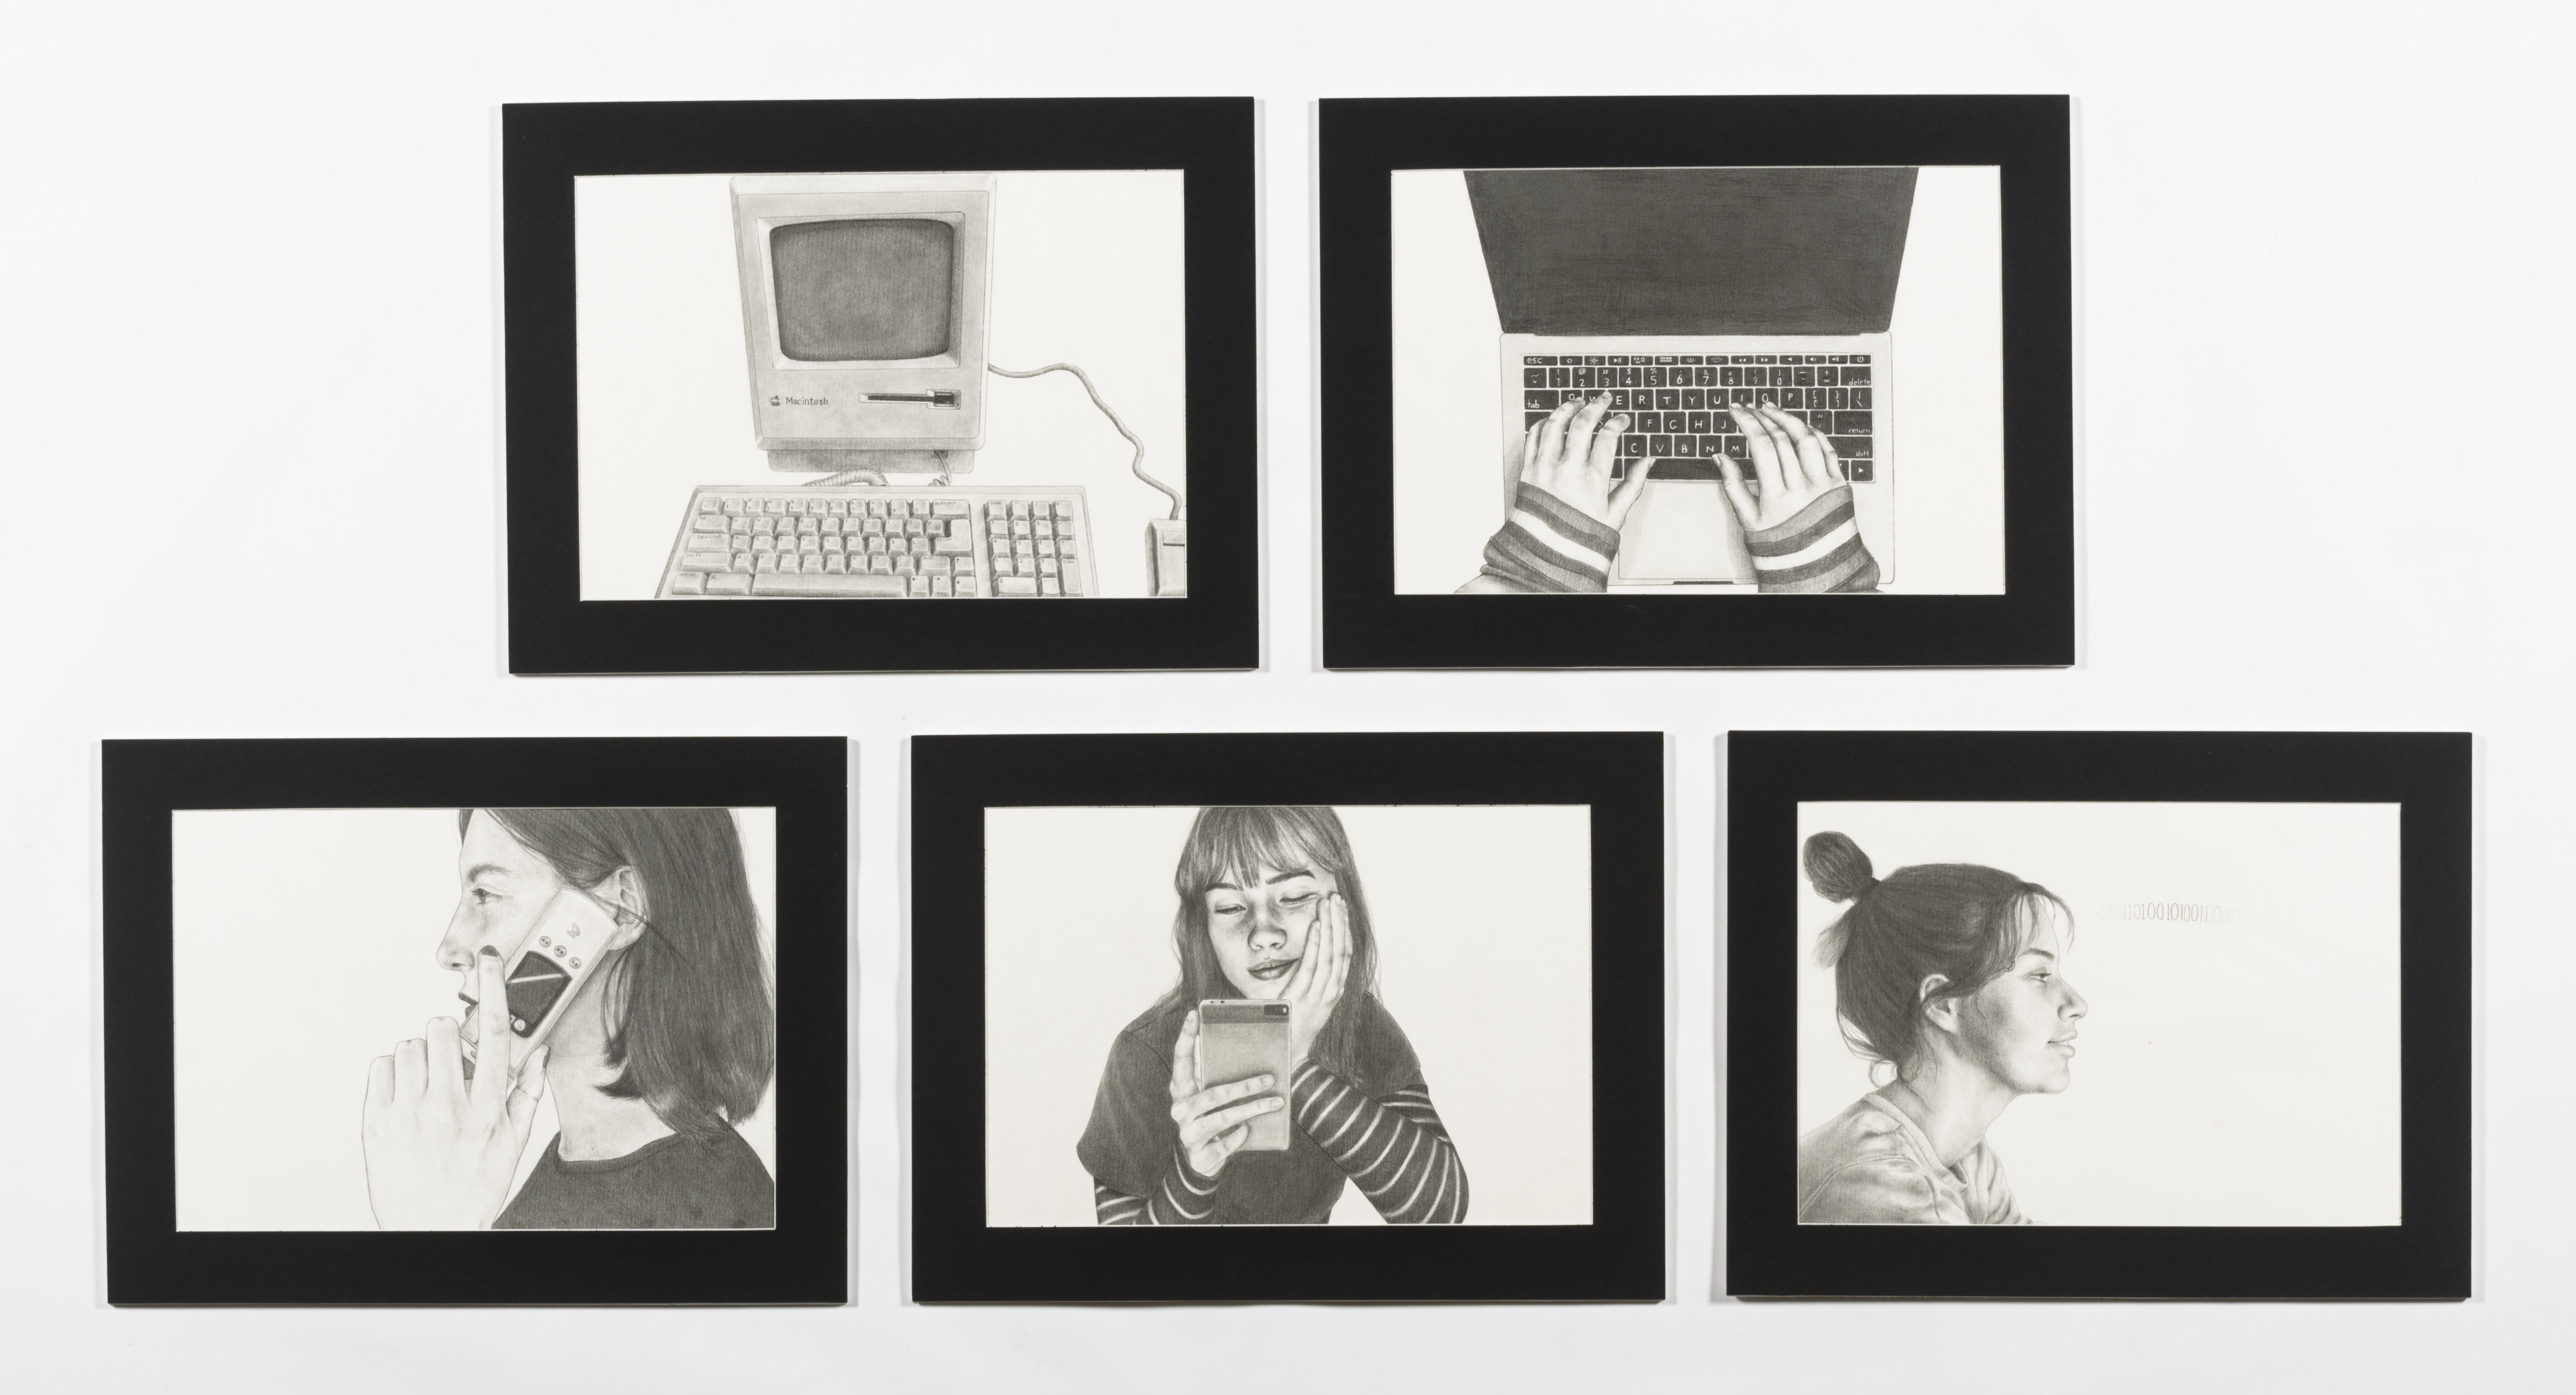 Five pencil drawings showing the people interacting with different modern technologies through time.